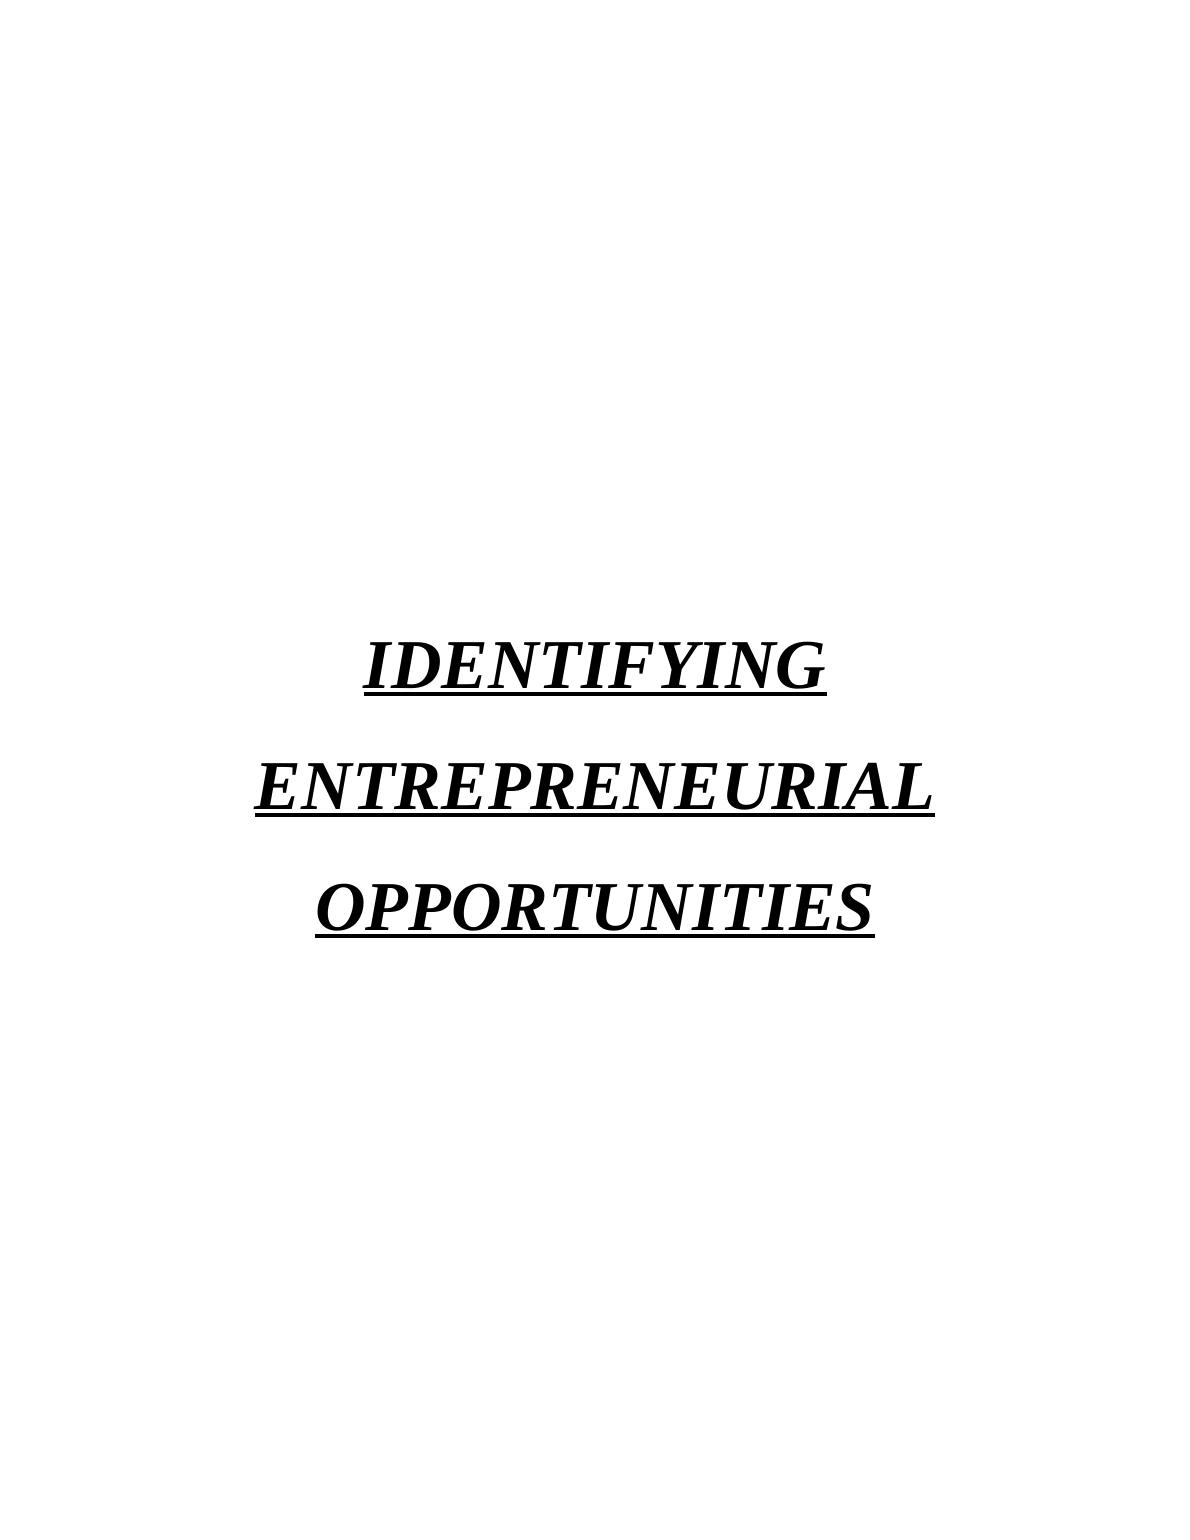 Identifying Entrepreneurial Opportunities – Assignment_1